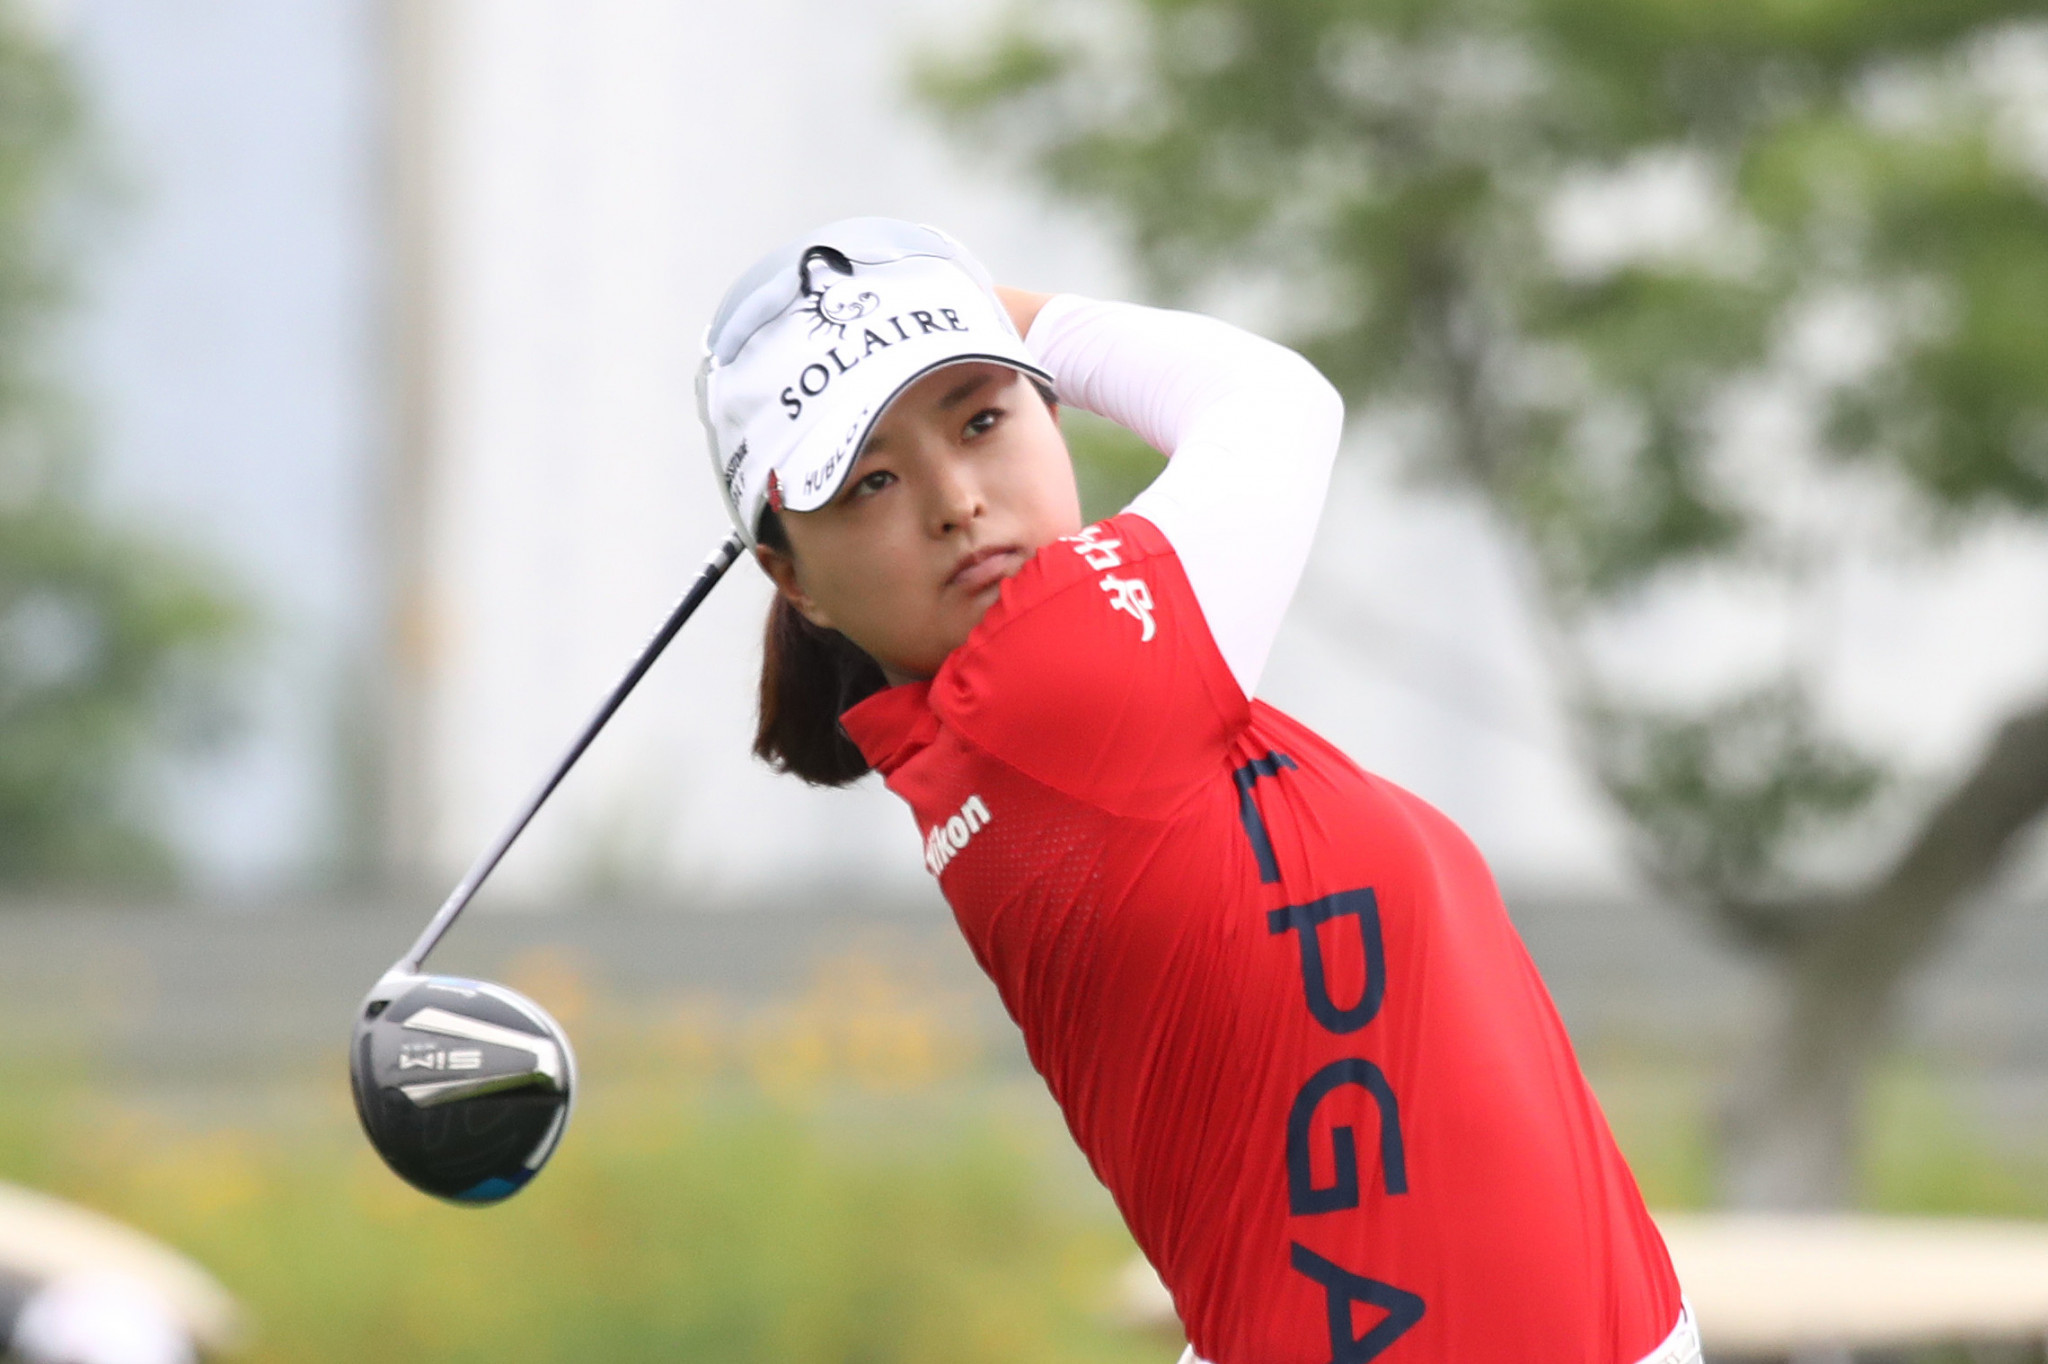 South Korean golf stars set to miss Women's British Open over COVID-19 fears